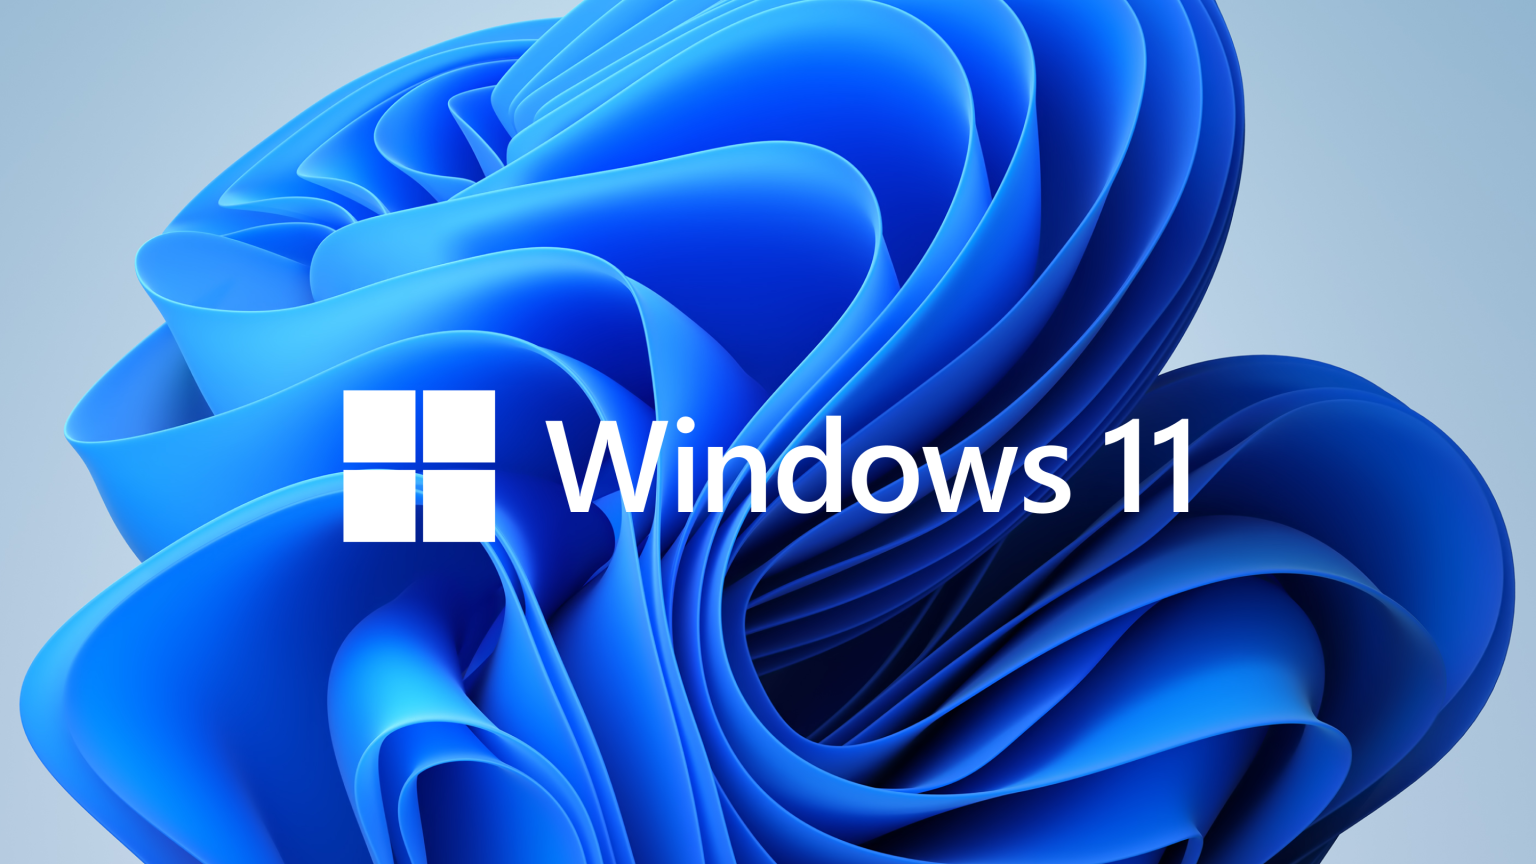 Windows 11: Release Date, Price, System Requirements and everything you need to know